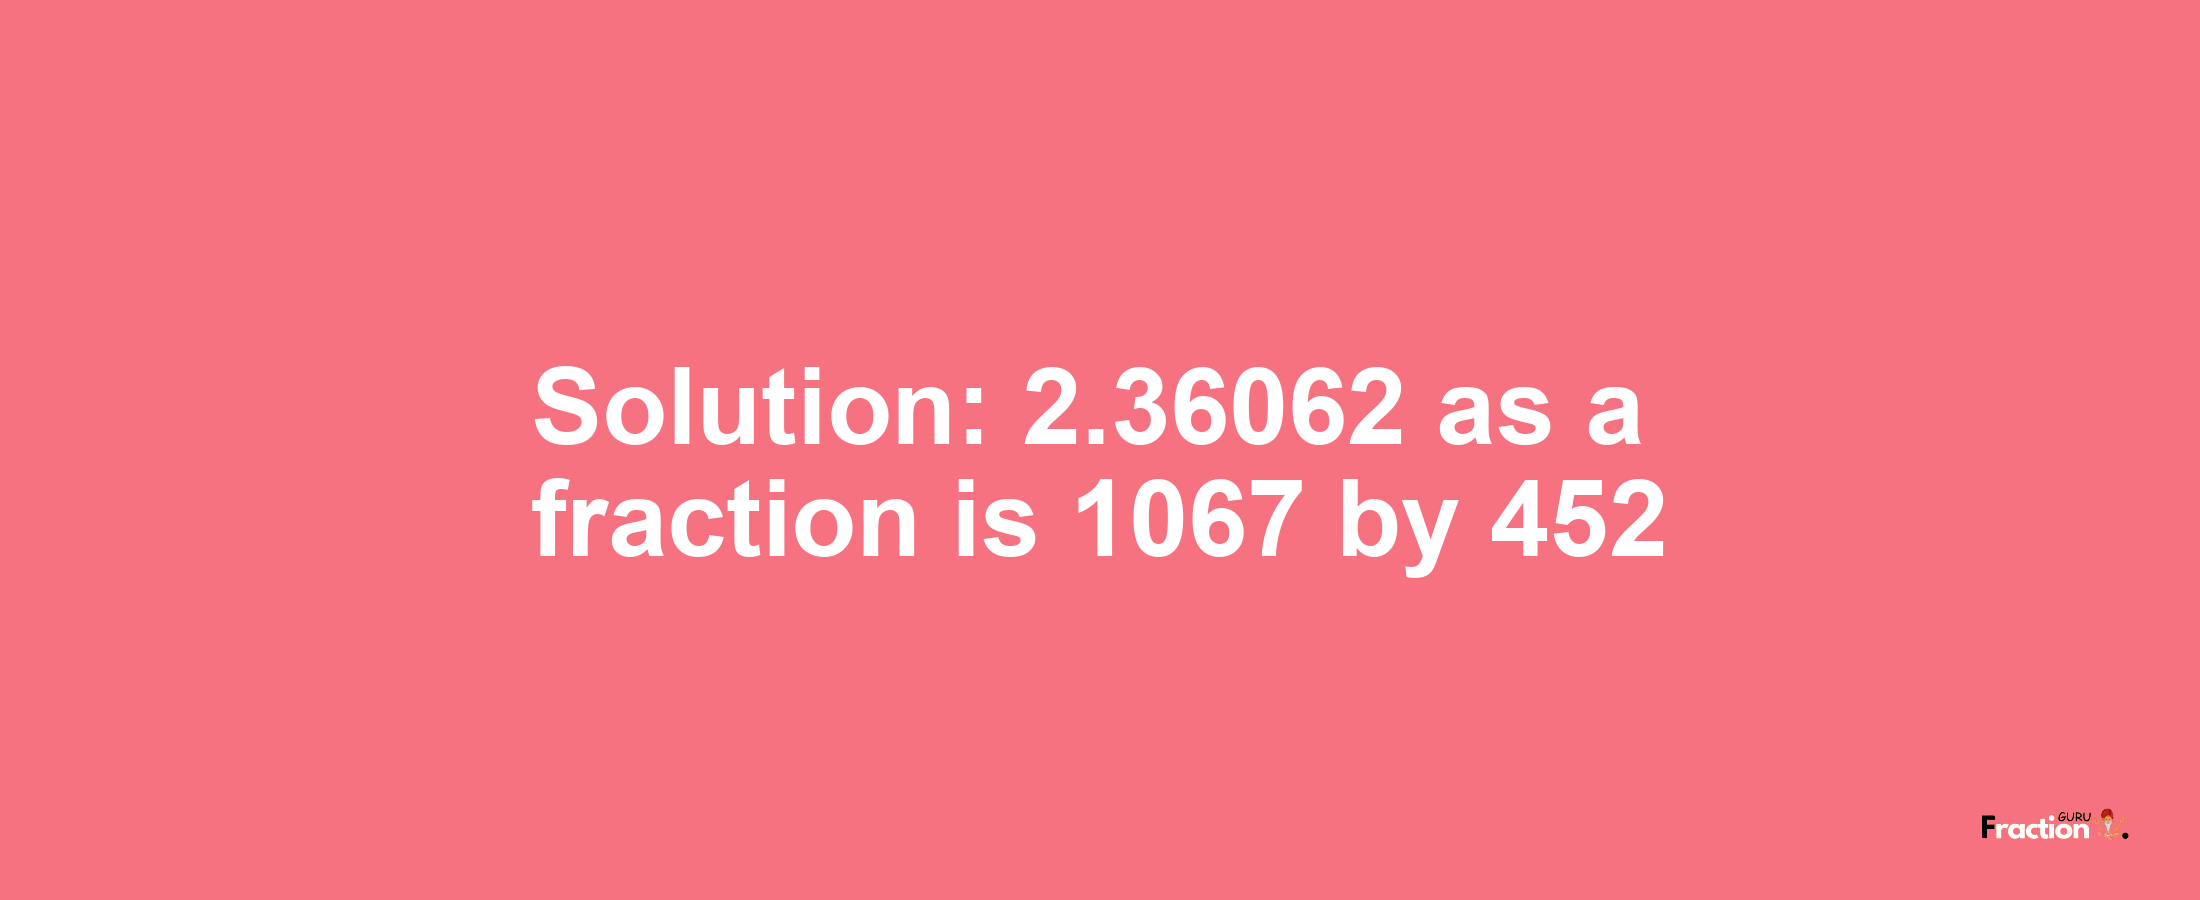 Solution:2.36062 as a fraction is 1067/452